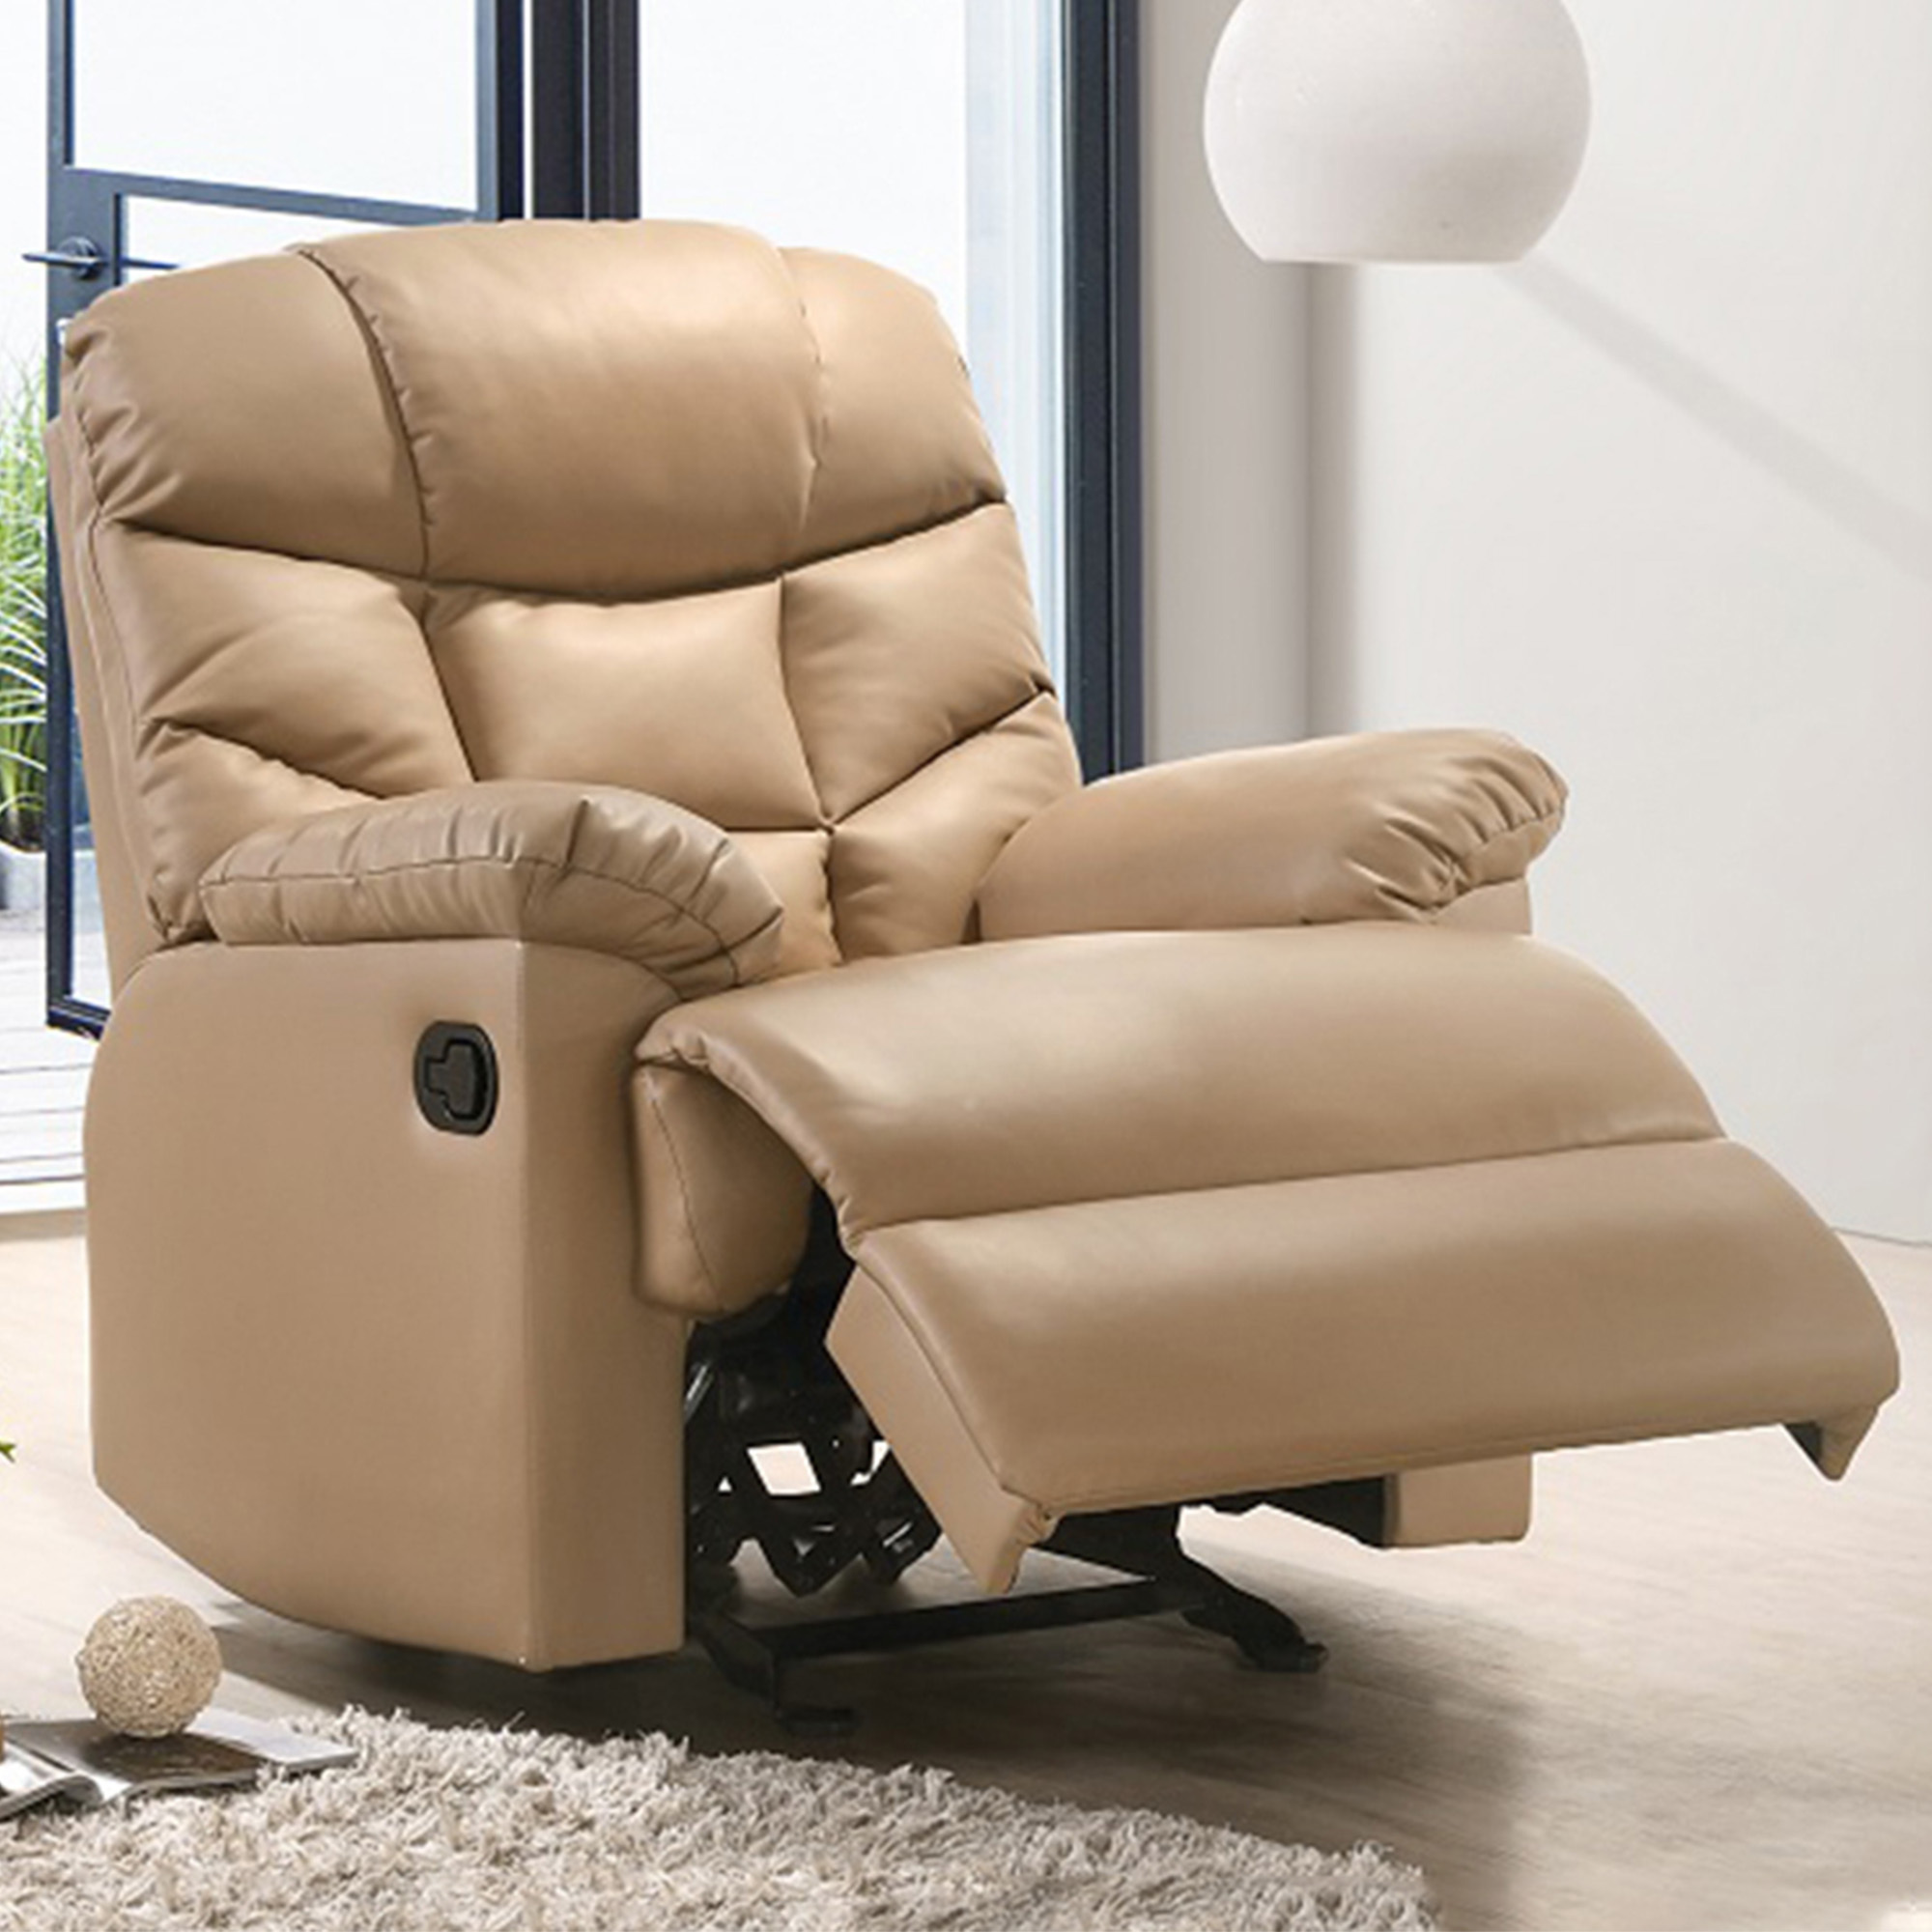 Nordichouse Beige Fabby Faux Leather Recliner Armchair Temple Webster